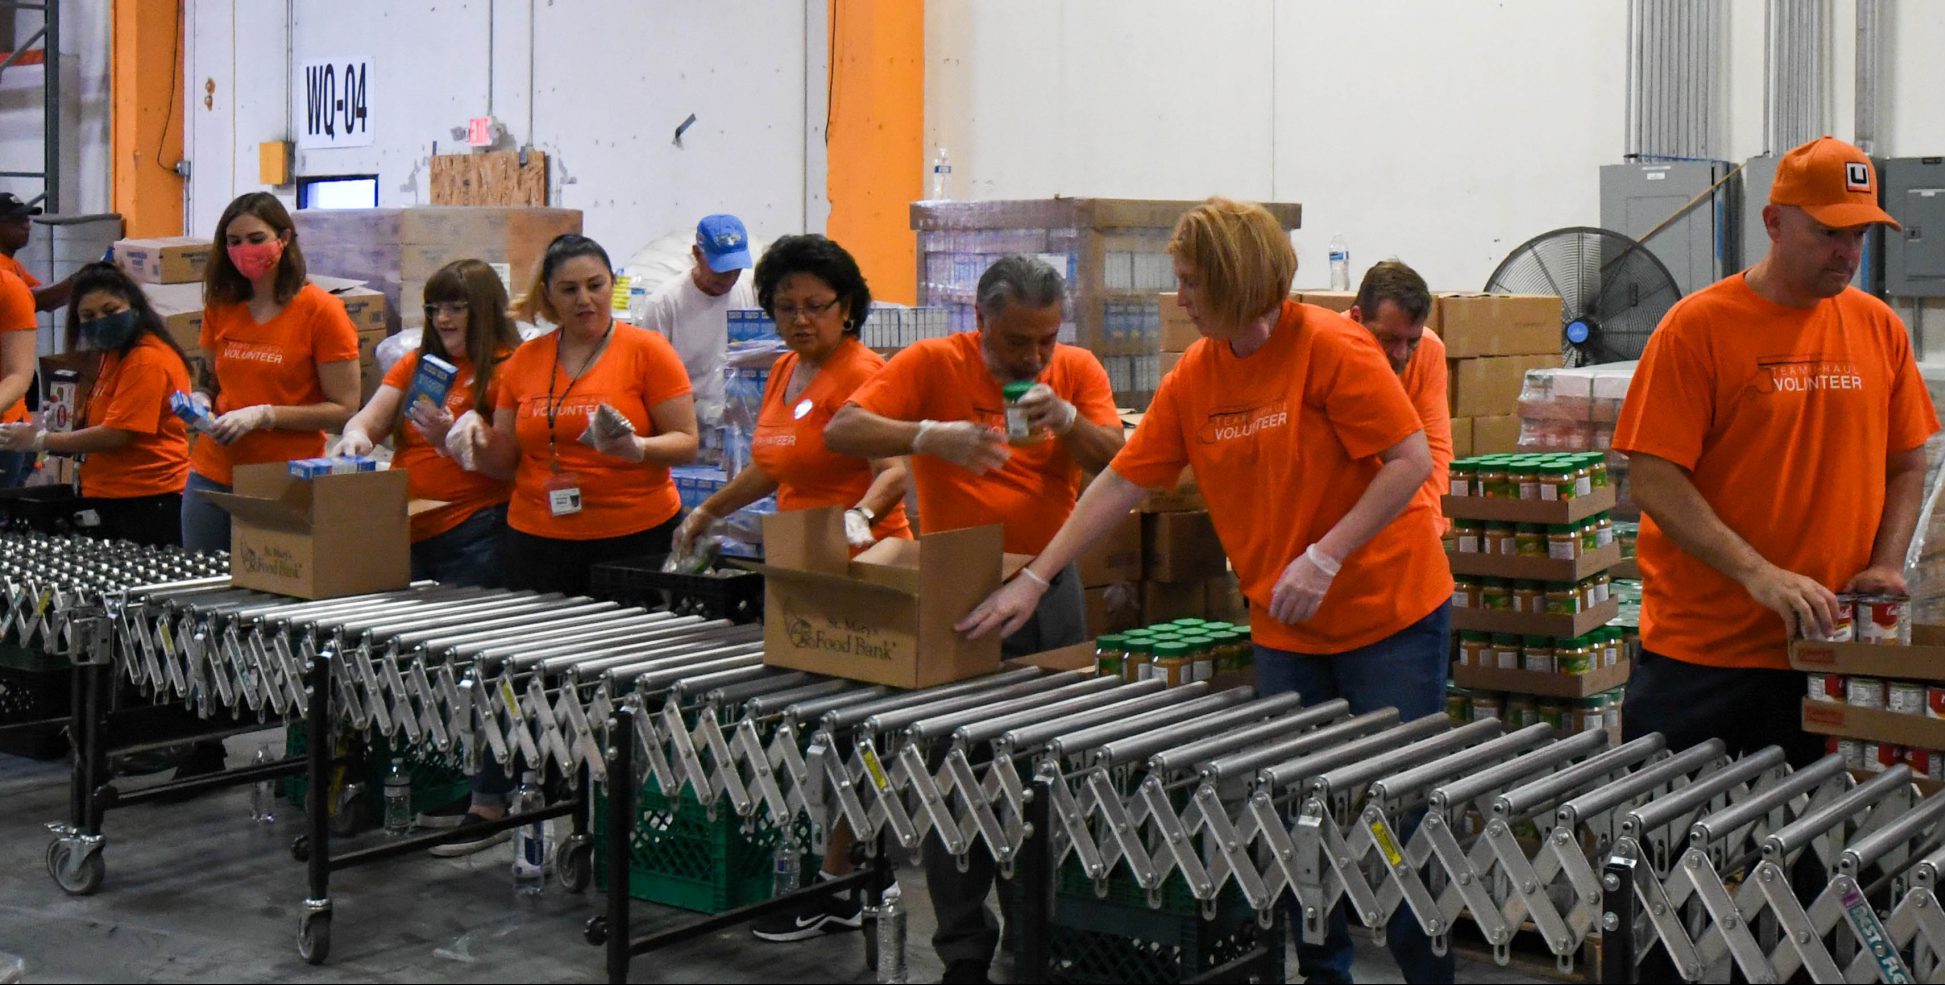 “Go Orange Day” Shows U-Haul Support for Fighting Hunger